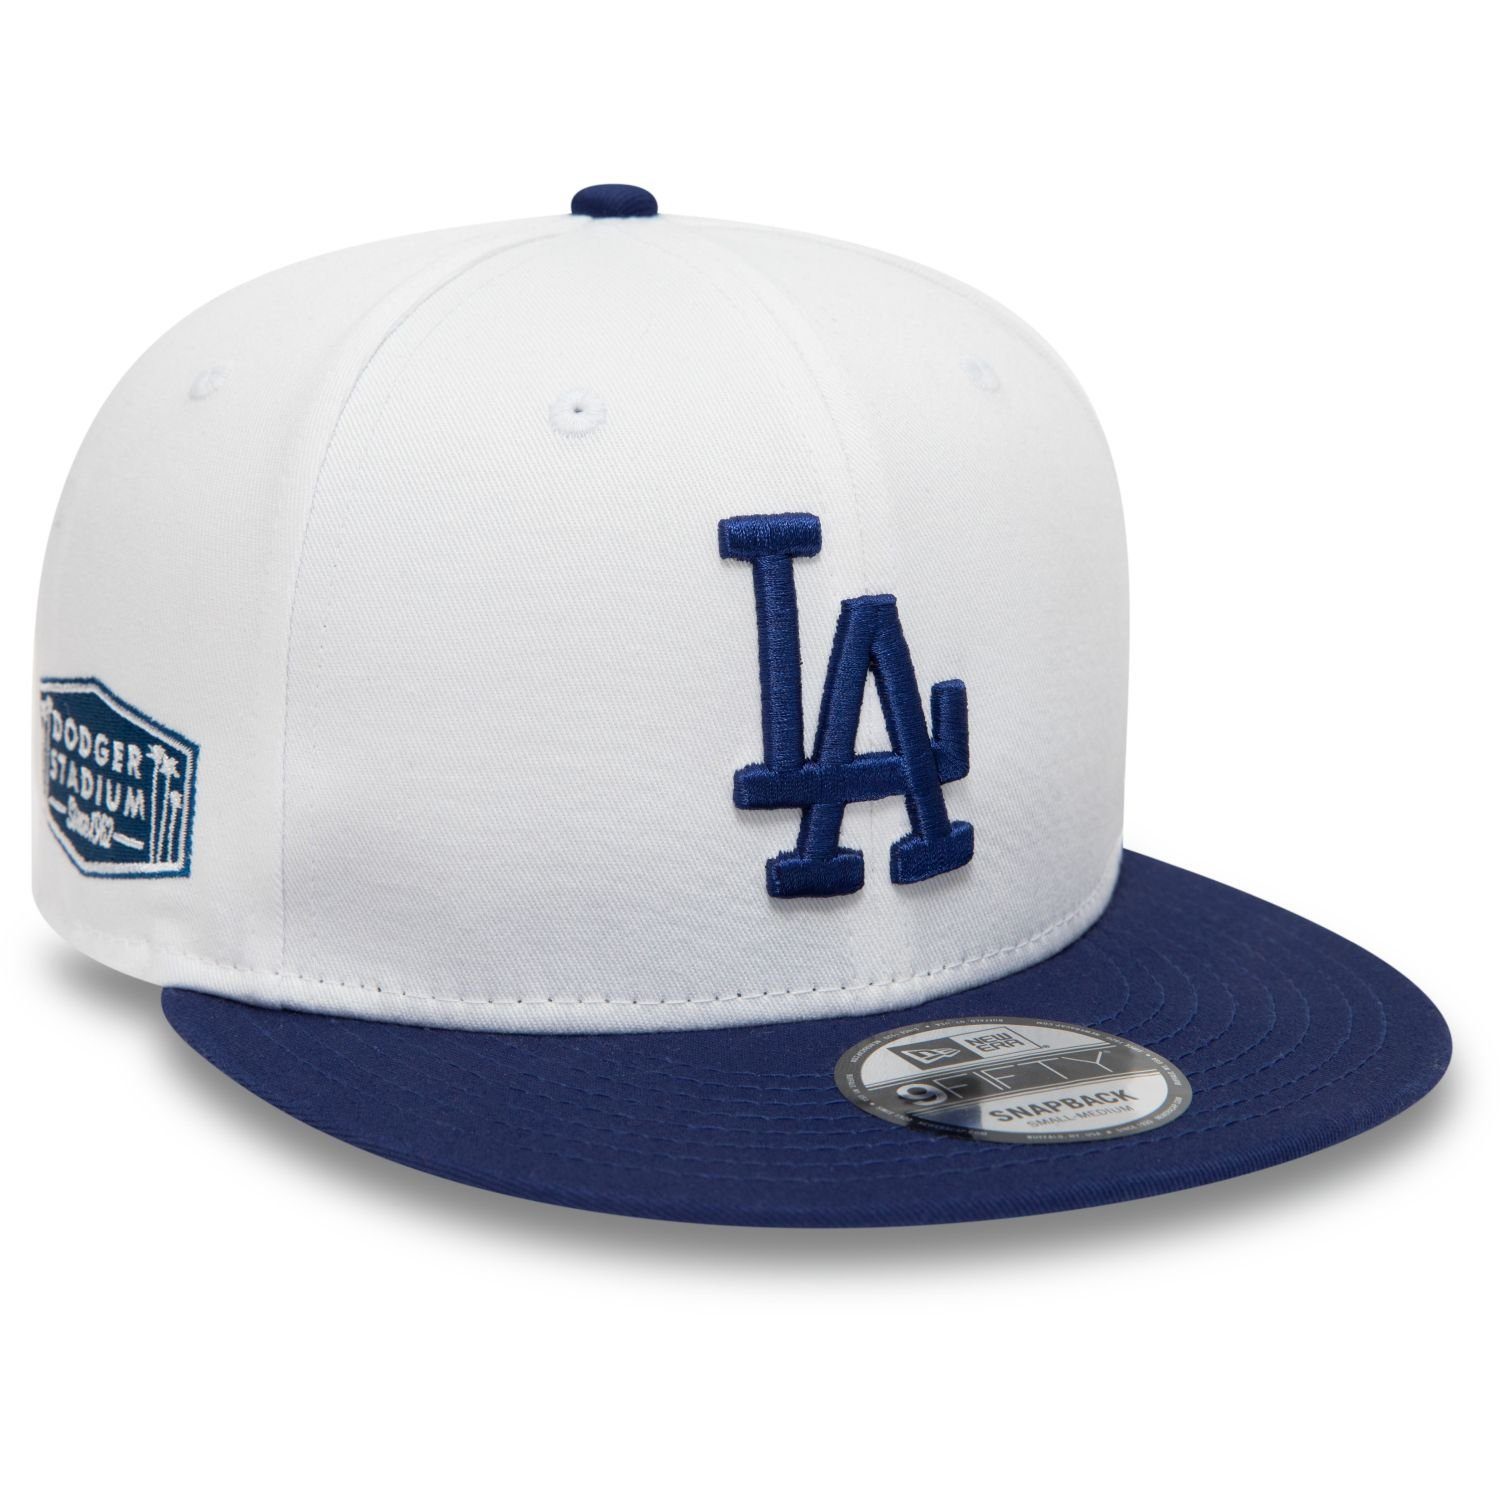 New Era Snapback Cap 9Fifty SIDE PATCH Los Angeles Dodgers